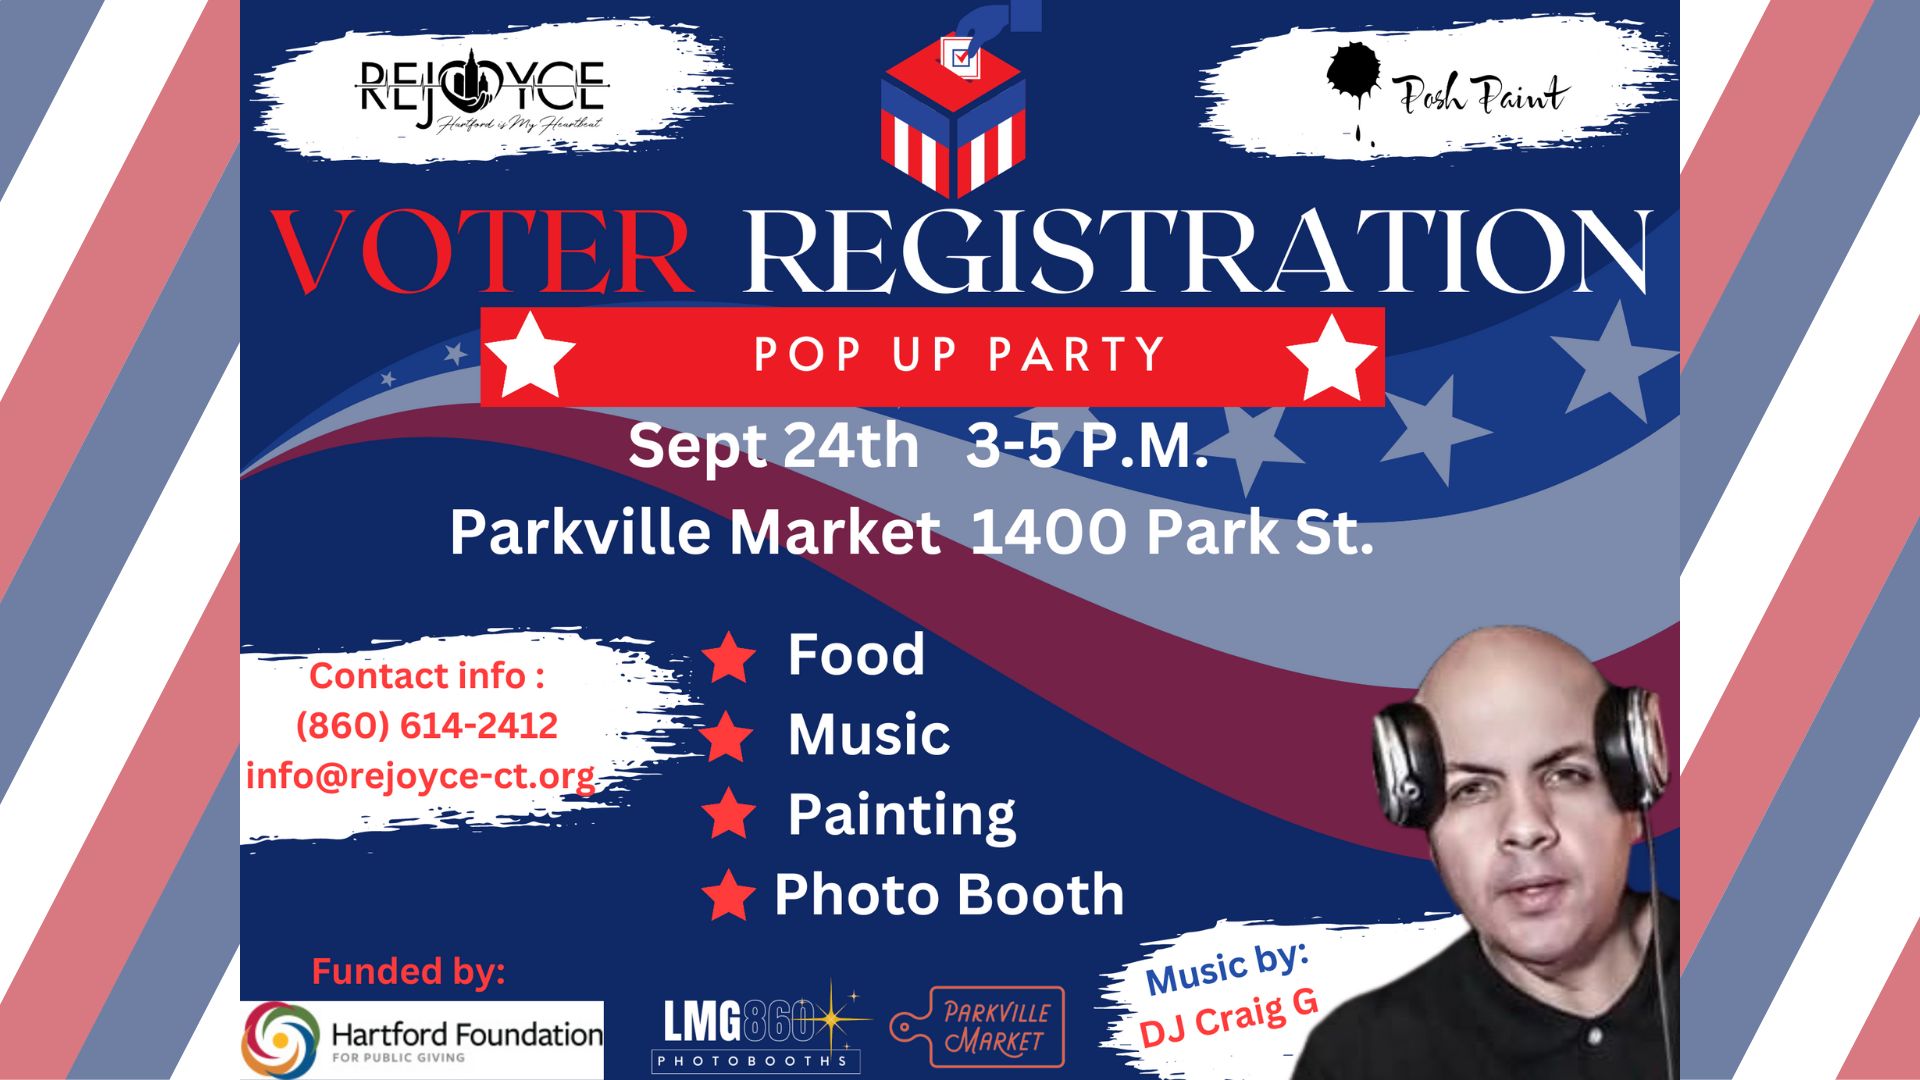 promo graphic for voter registration pop-up party on sunday, september 24 from 3-5 PM